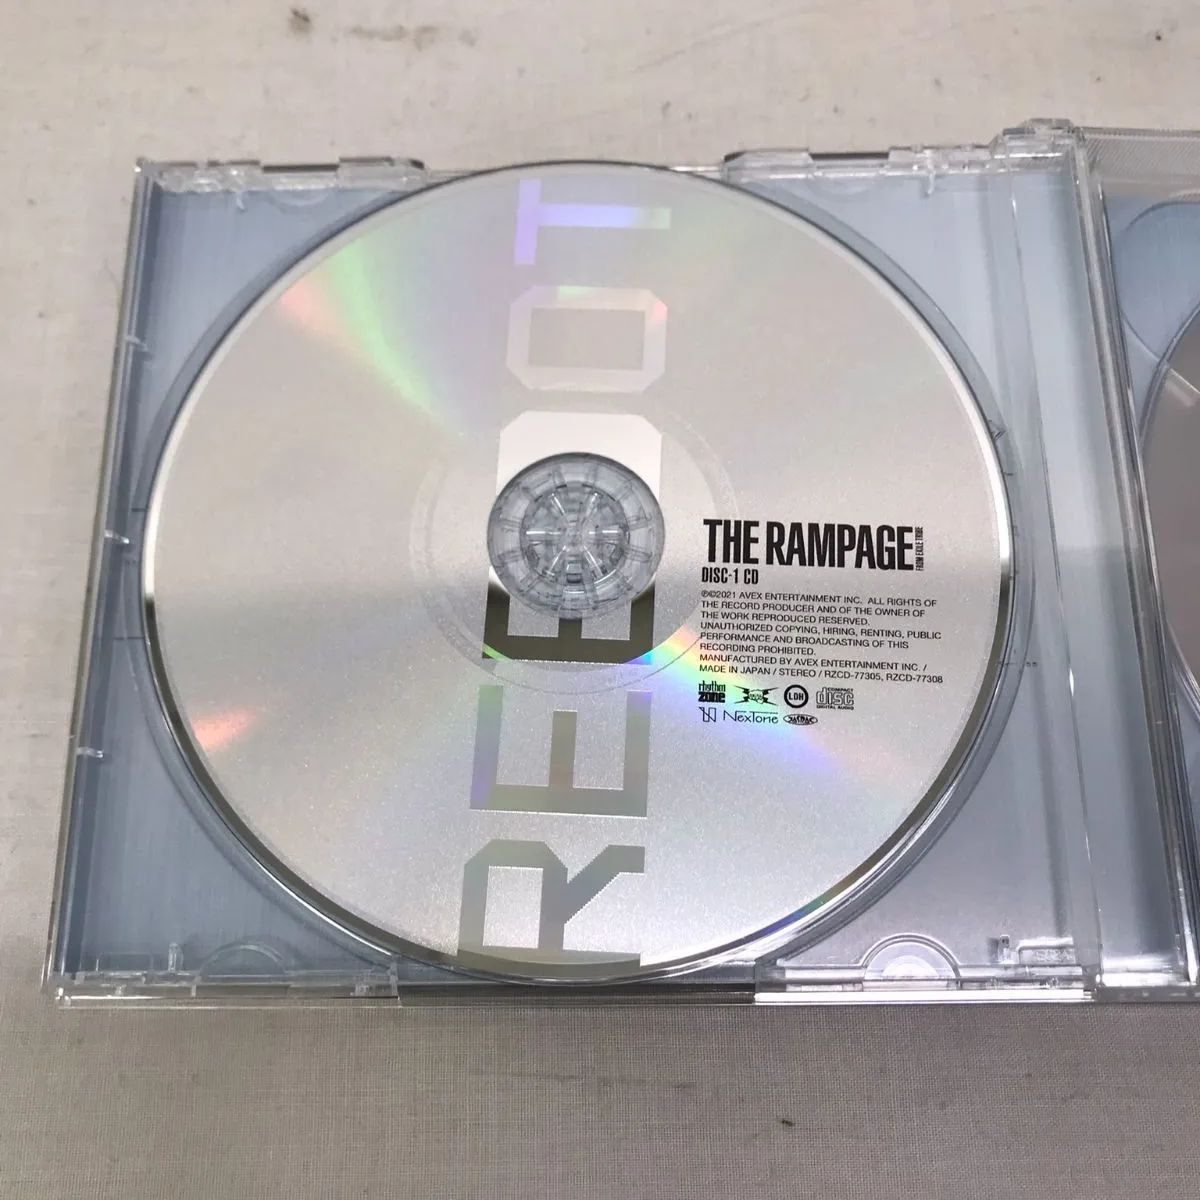 THE RAMPAGE from EXILE TRIBE/REBOOT (豪華盤/3CD+2Blu-ray) CD